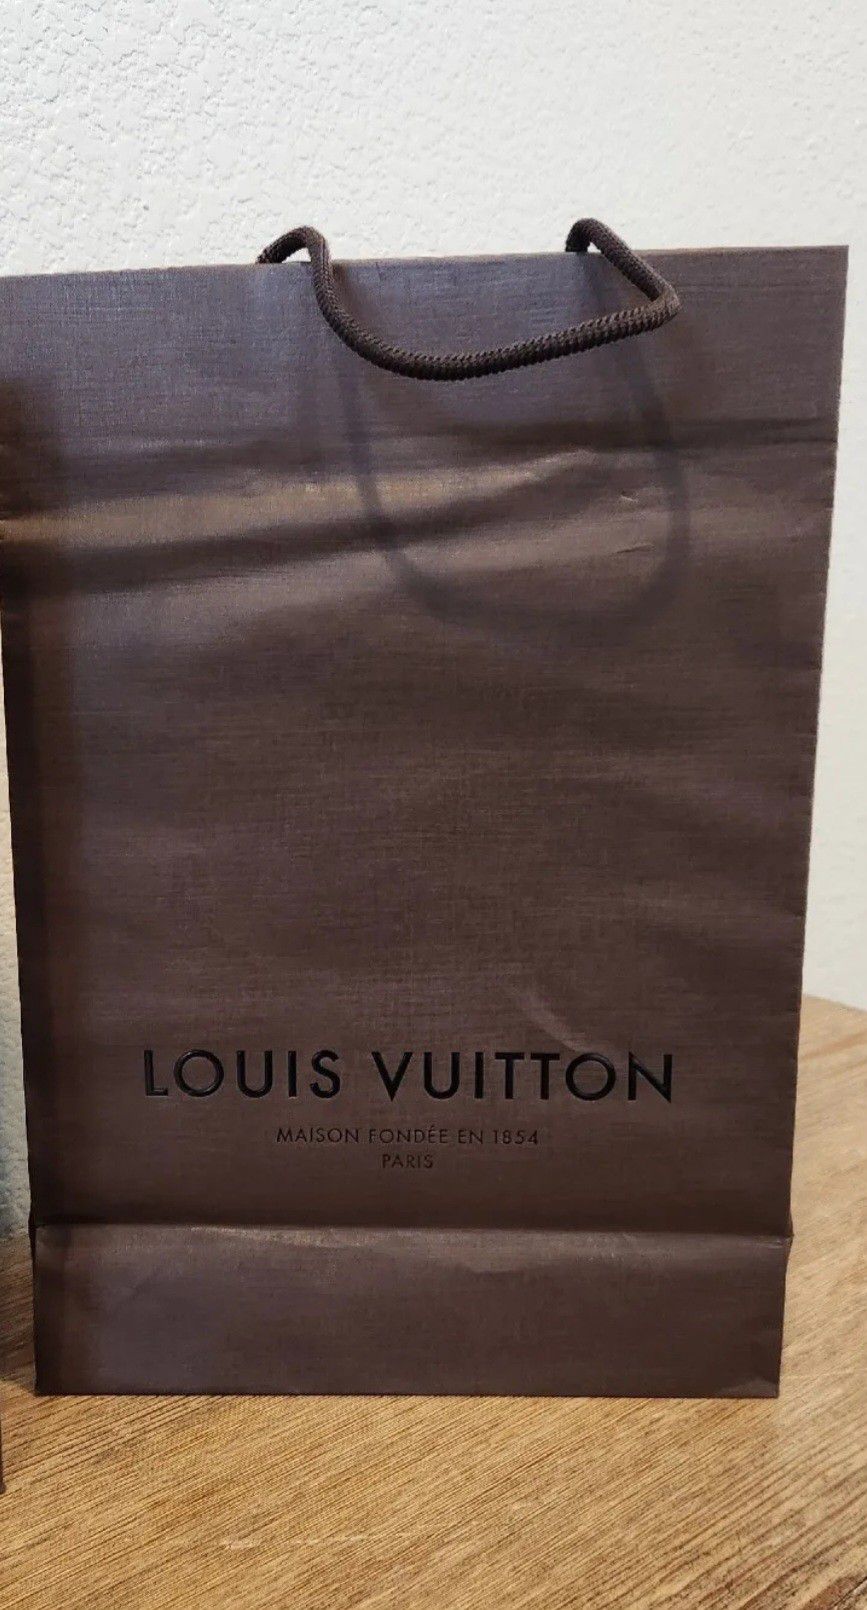 Authentic Large Louis Vuitton Paper Bag for Sale in Perris, CA